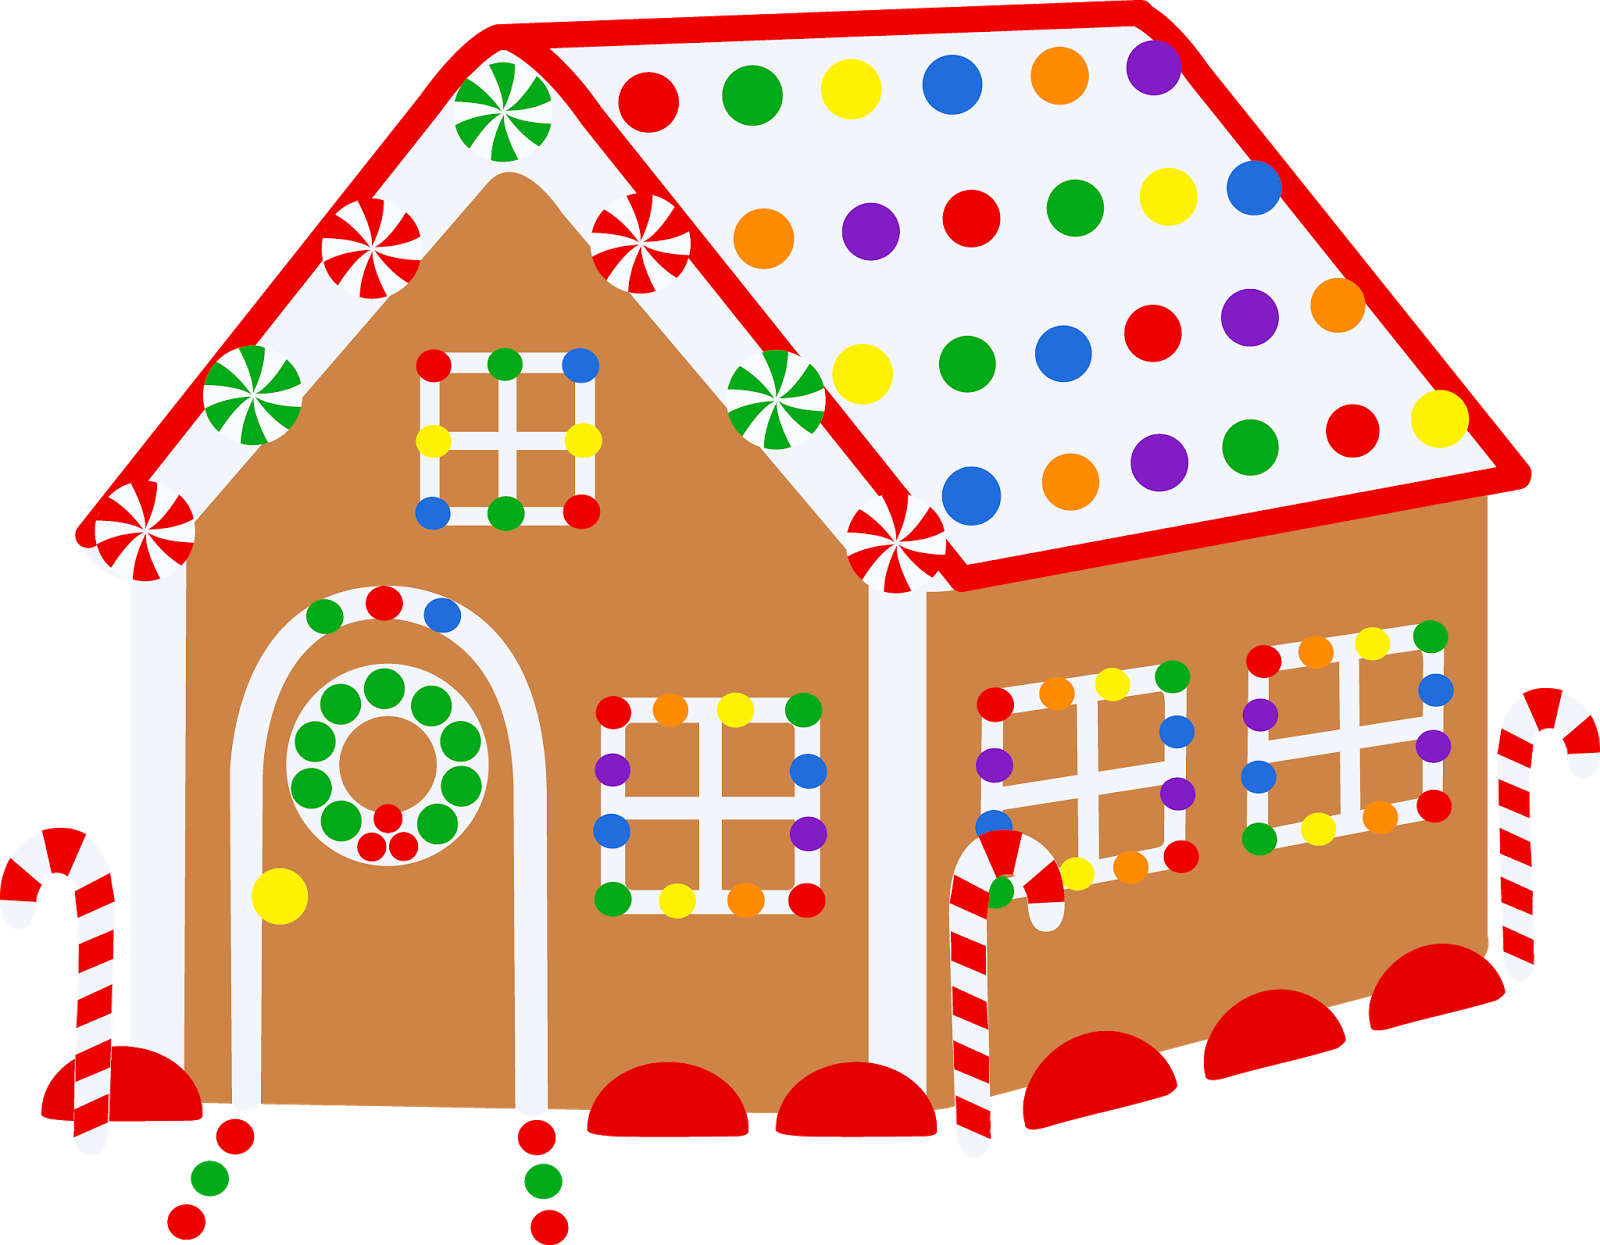 A Gingerbread House With Candy Canes